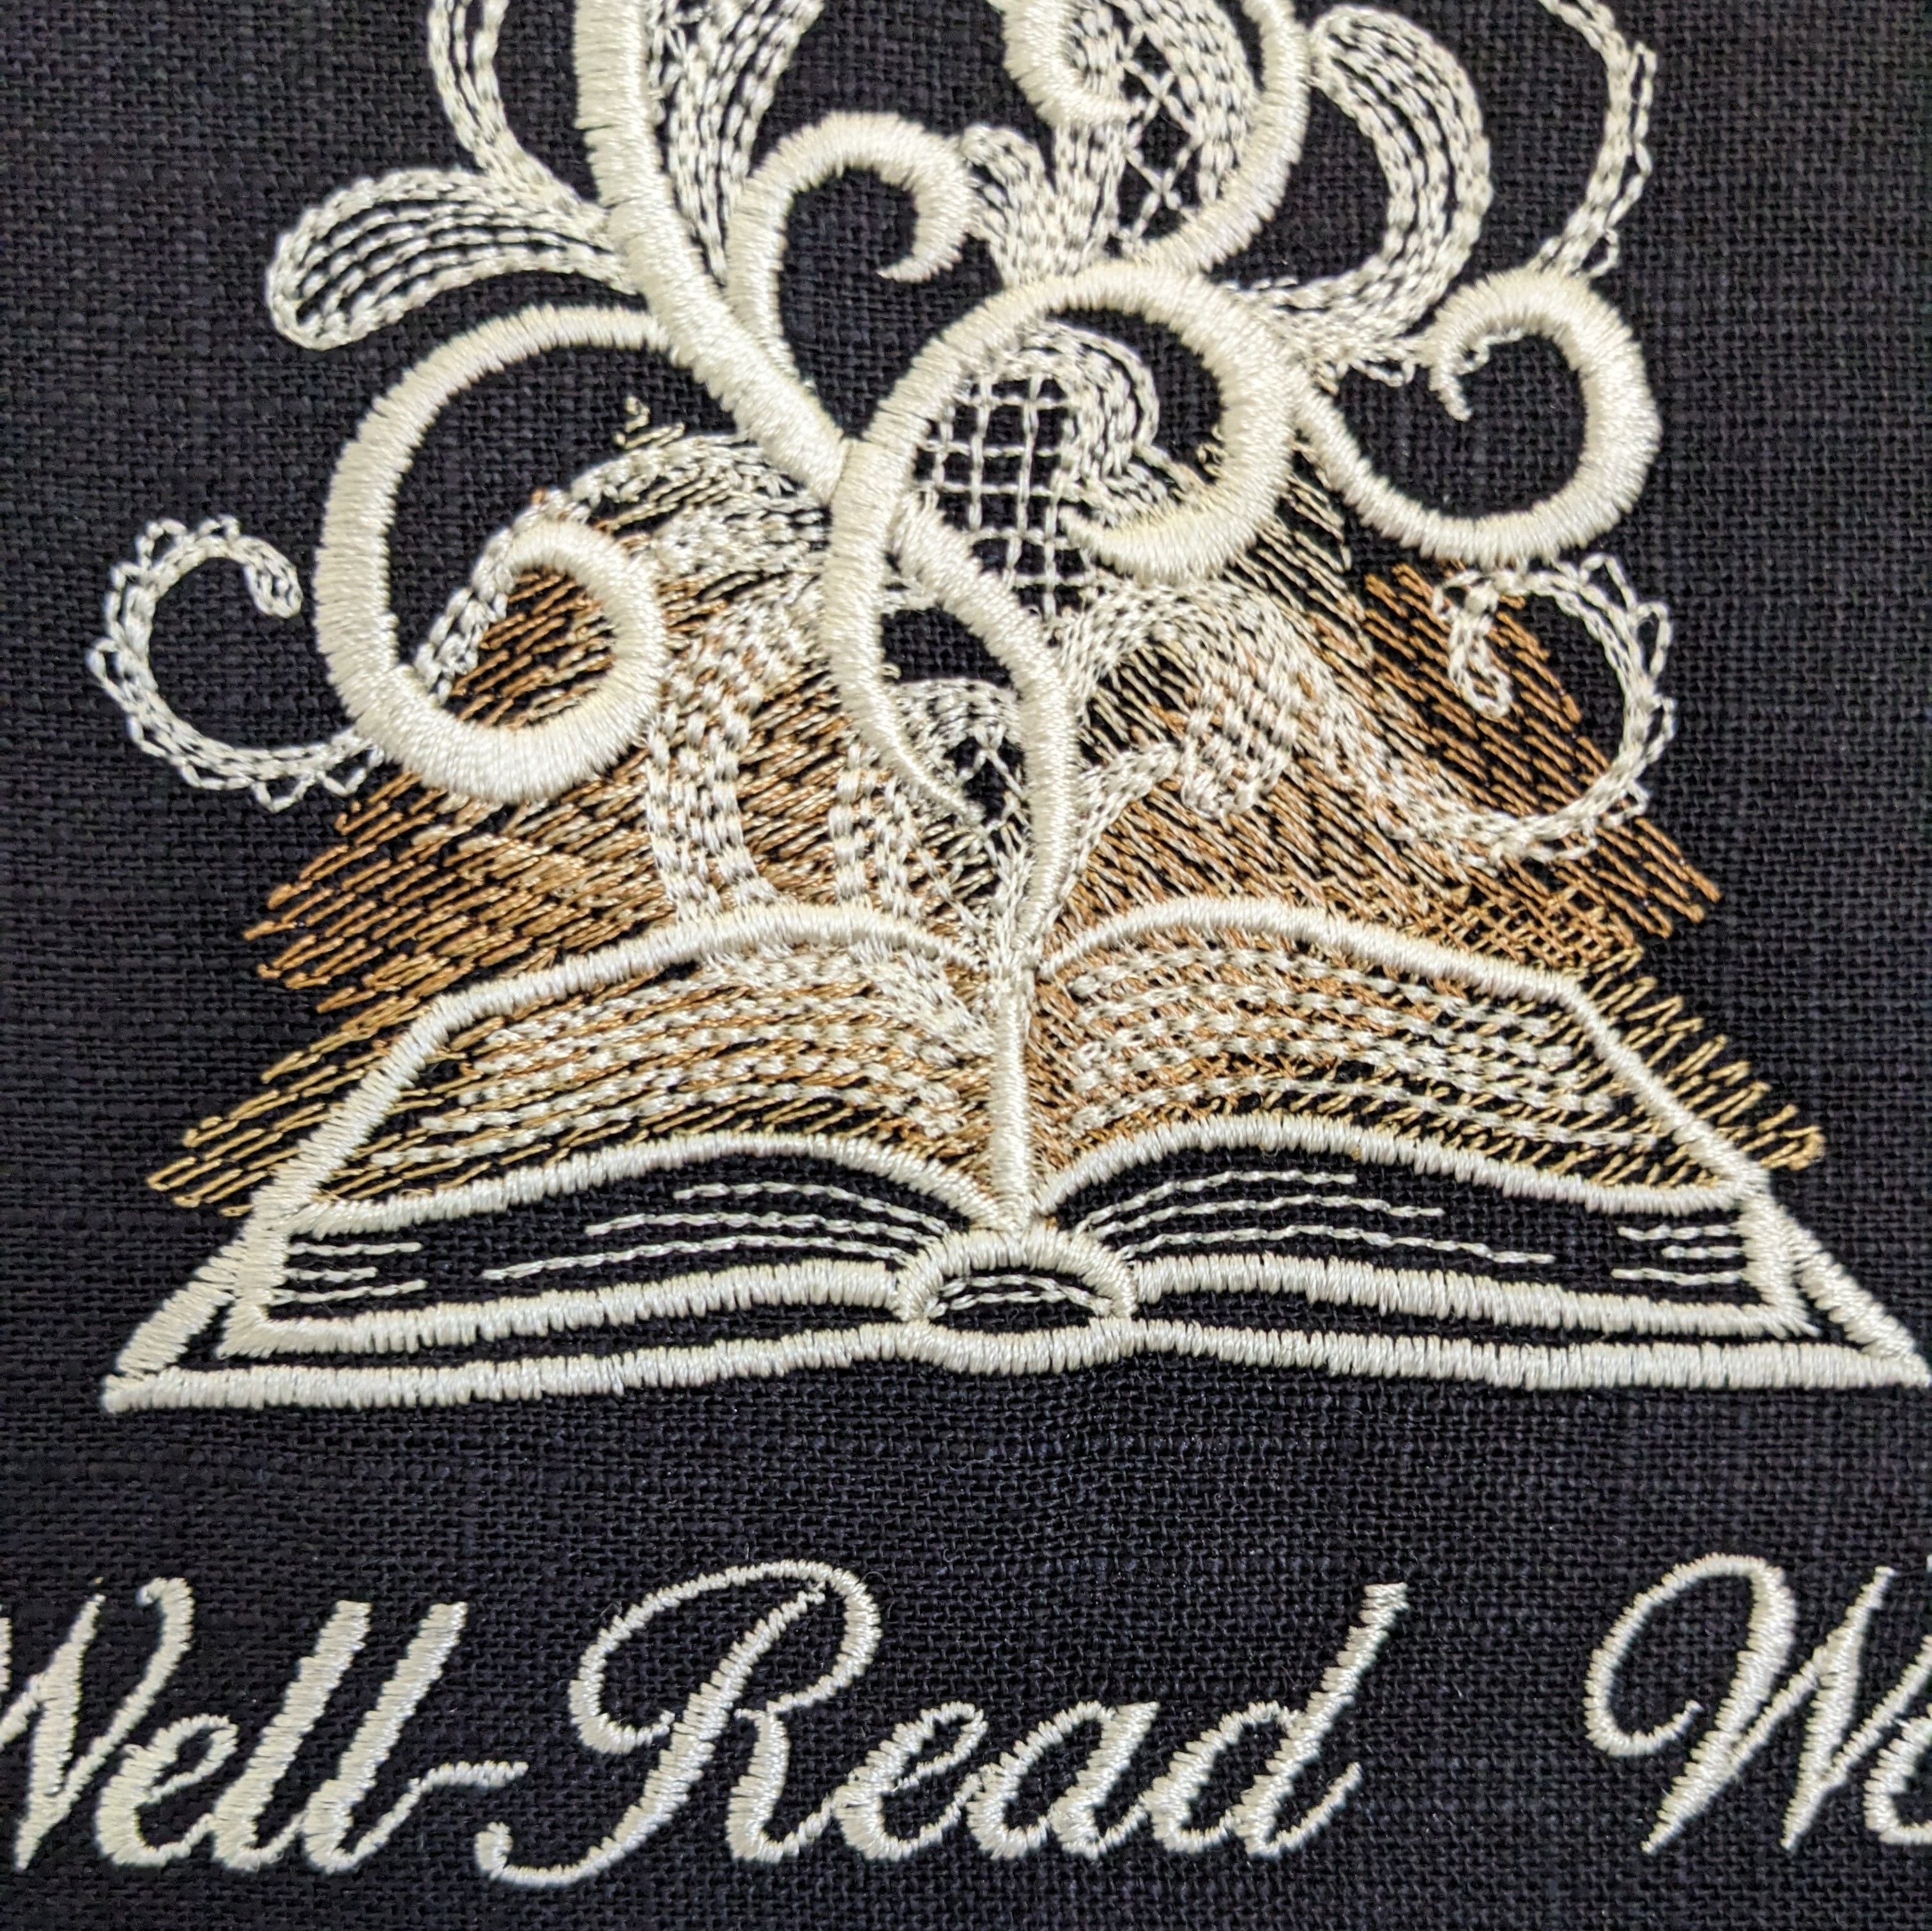 A well-read woman is a dangerous creature. Machine embroidery 8" hoop art